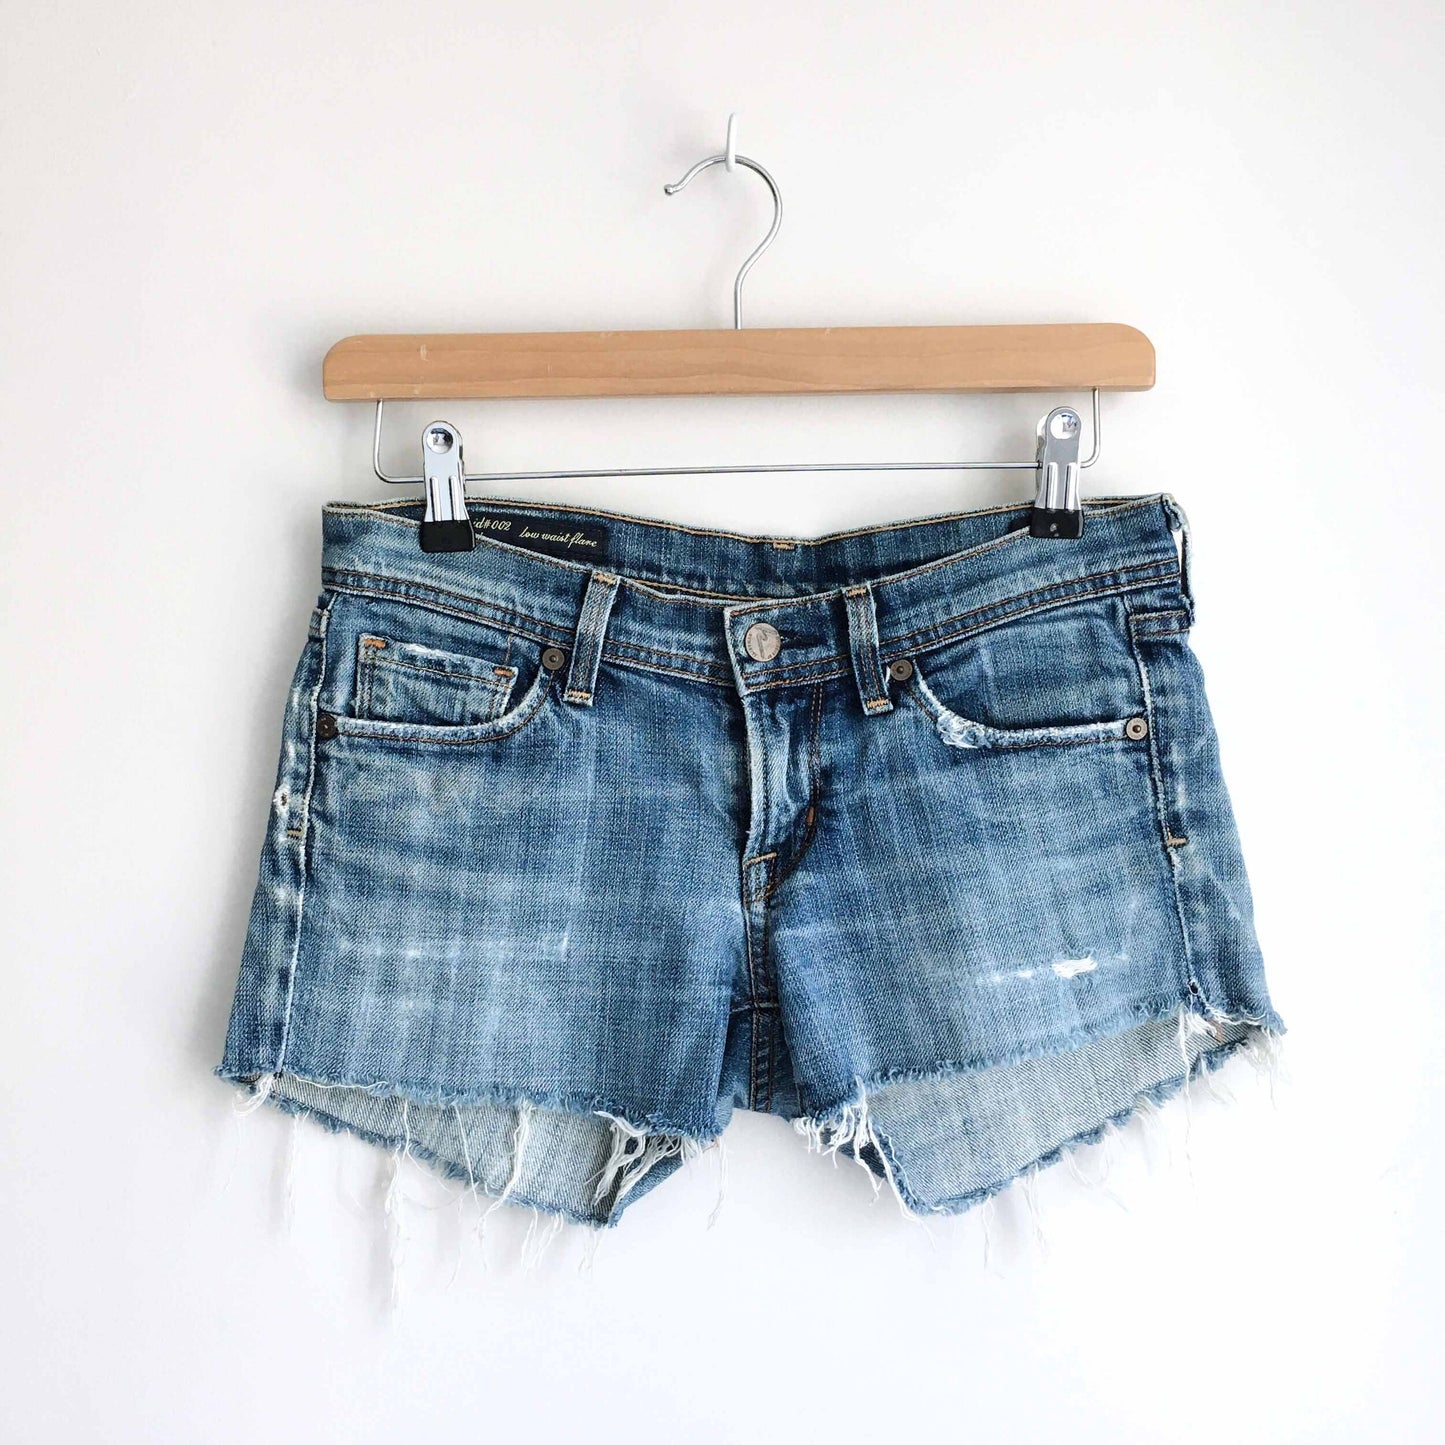 Citizens of Humanity cut off shorts - size 26